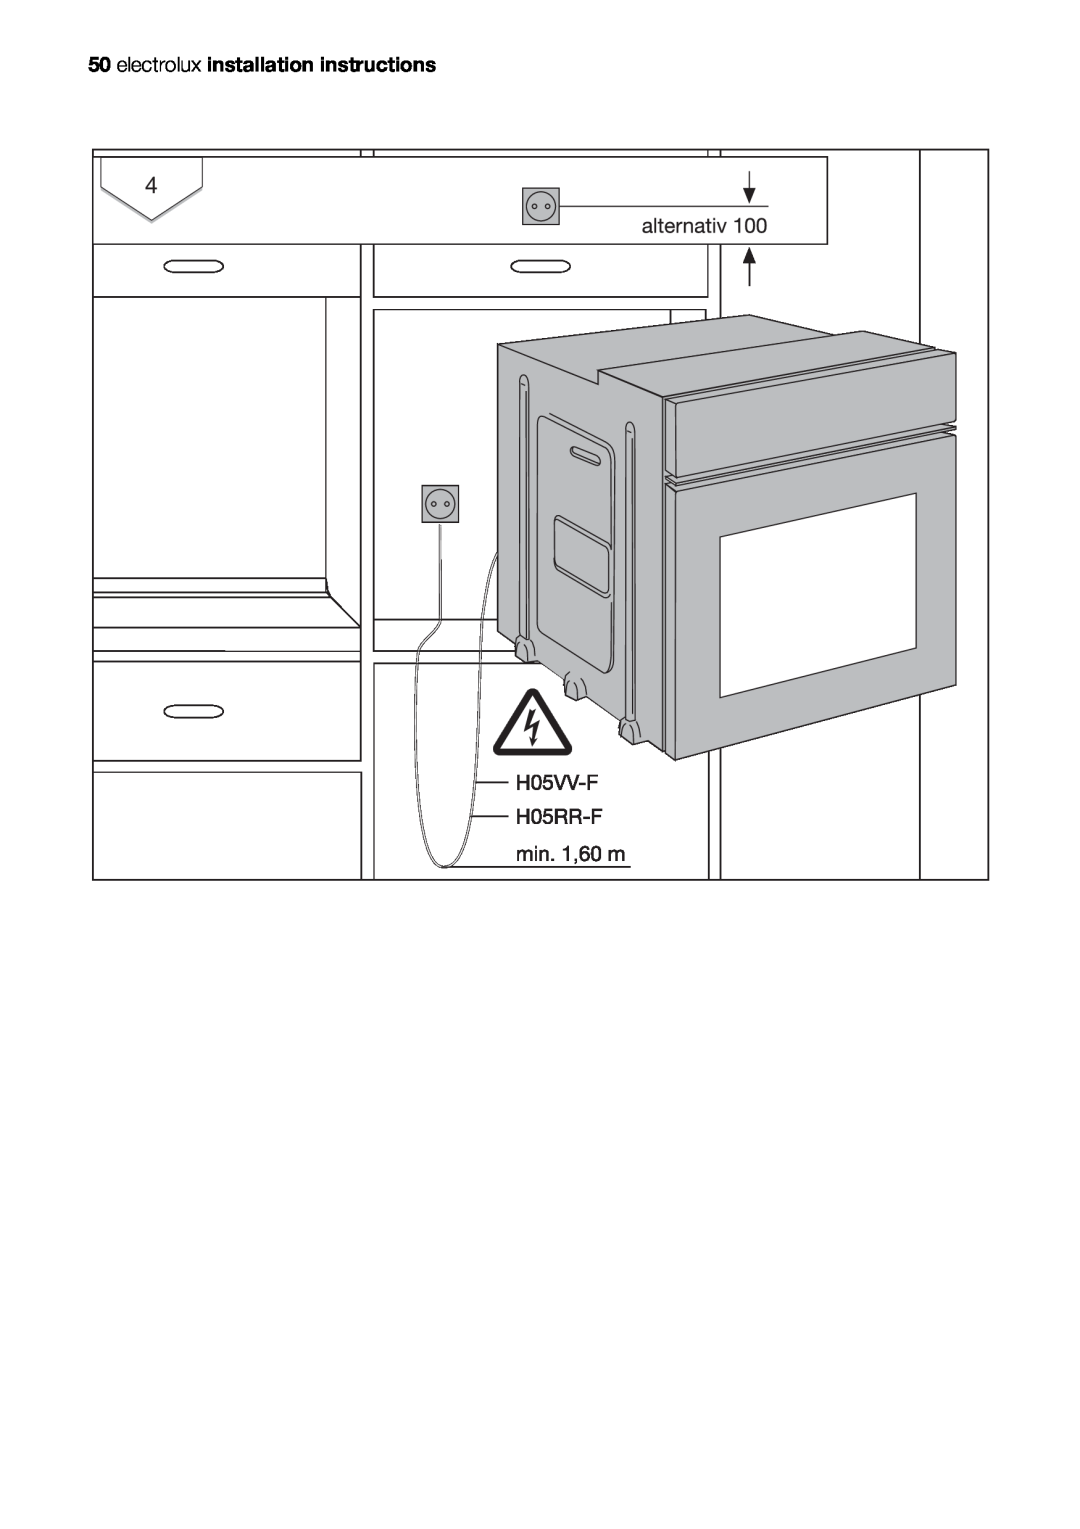 Electrolux EOB53000 user manual electrolux installation instructions 